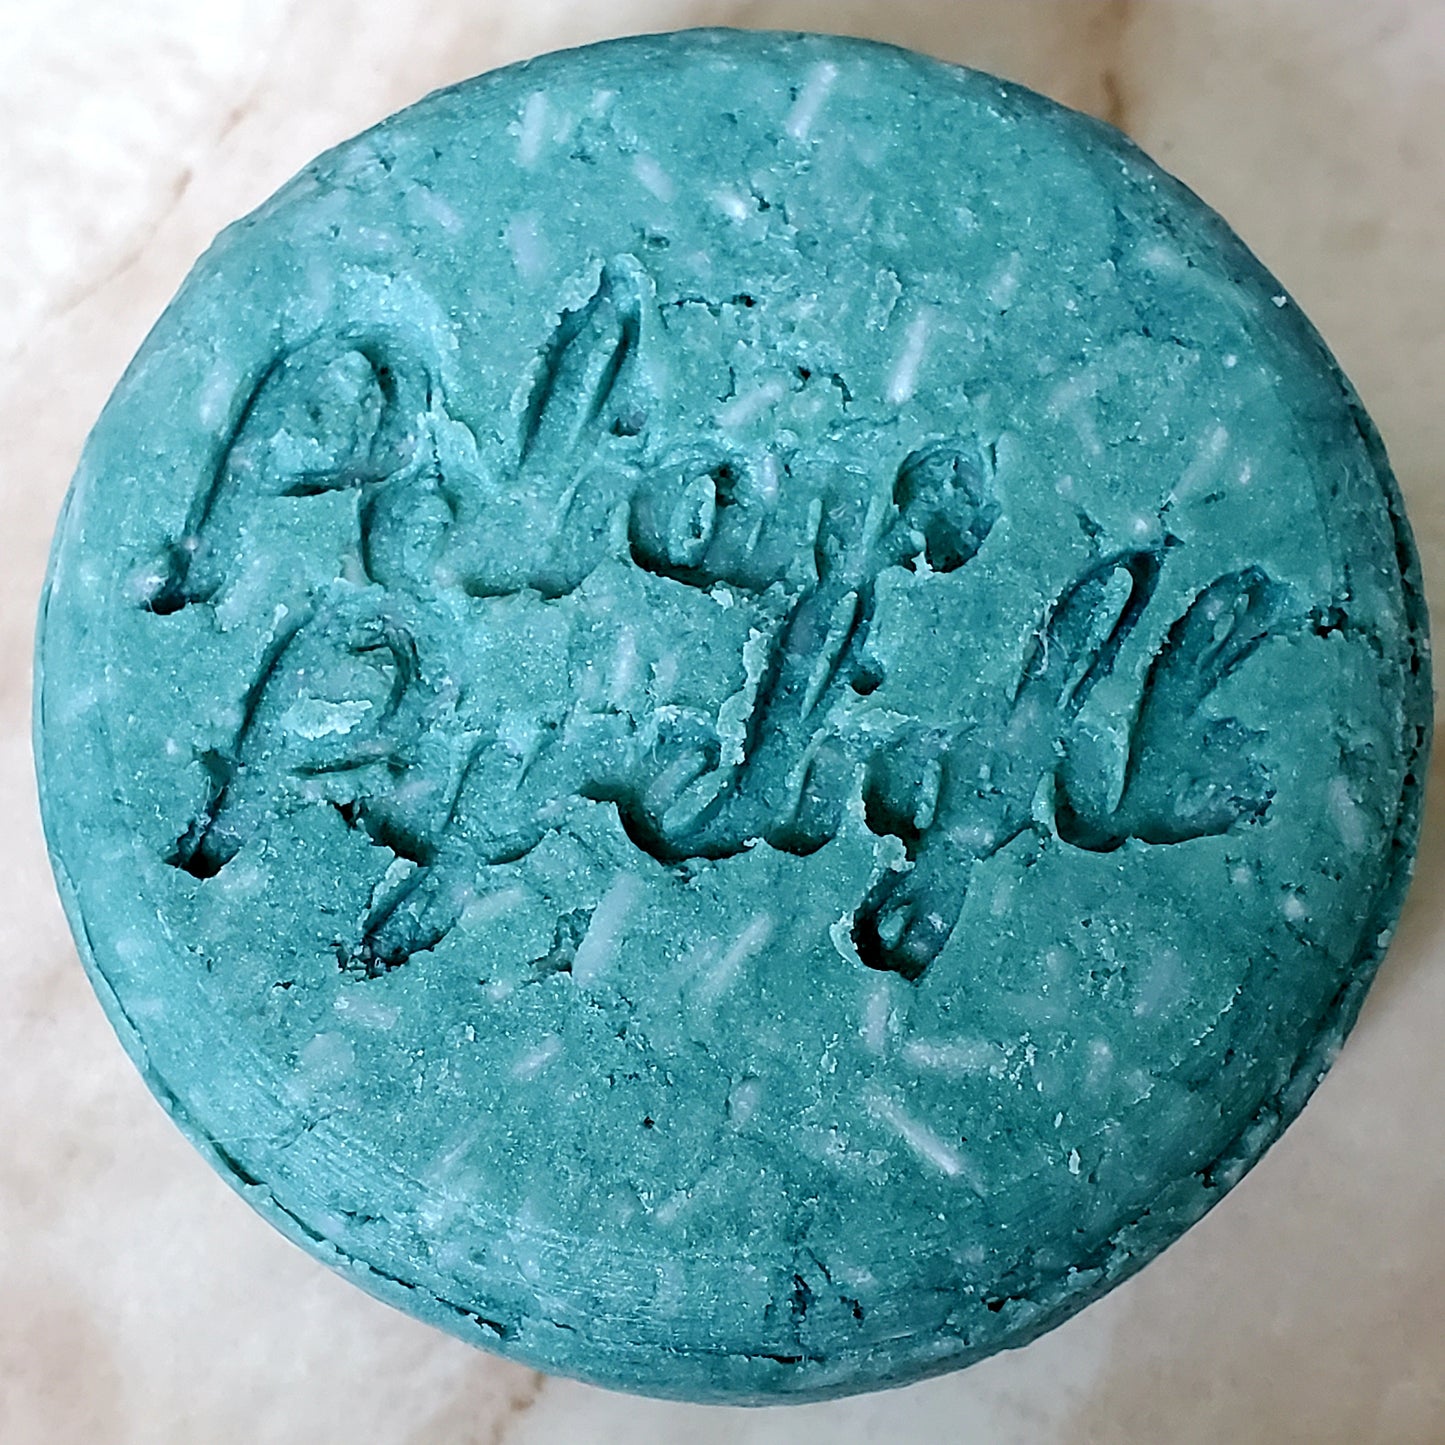 Final Fantasy VII - Cloud Strife Cleansing Shampoo Bar - Potions & Pyrelight